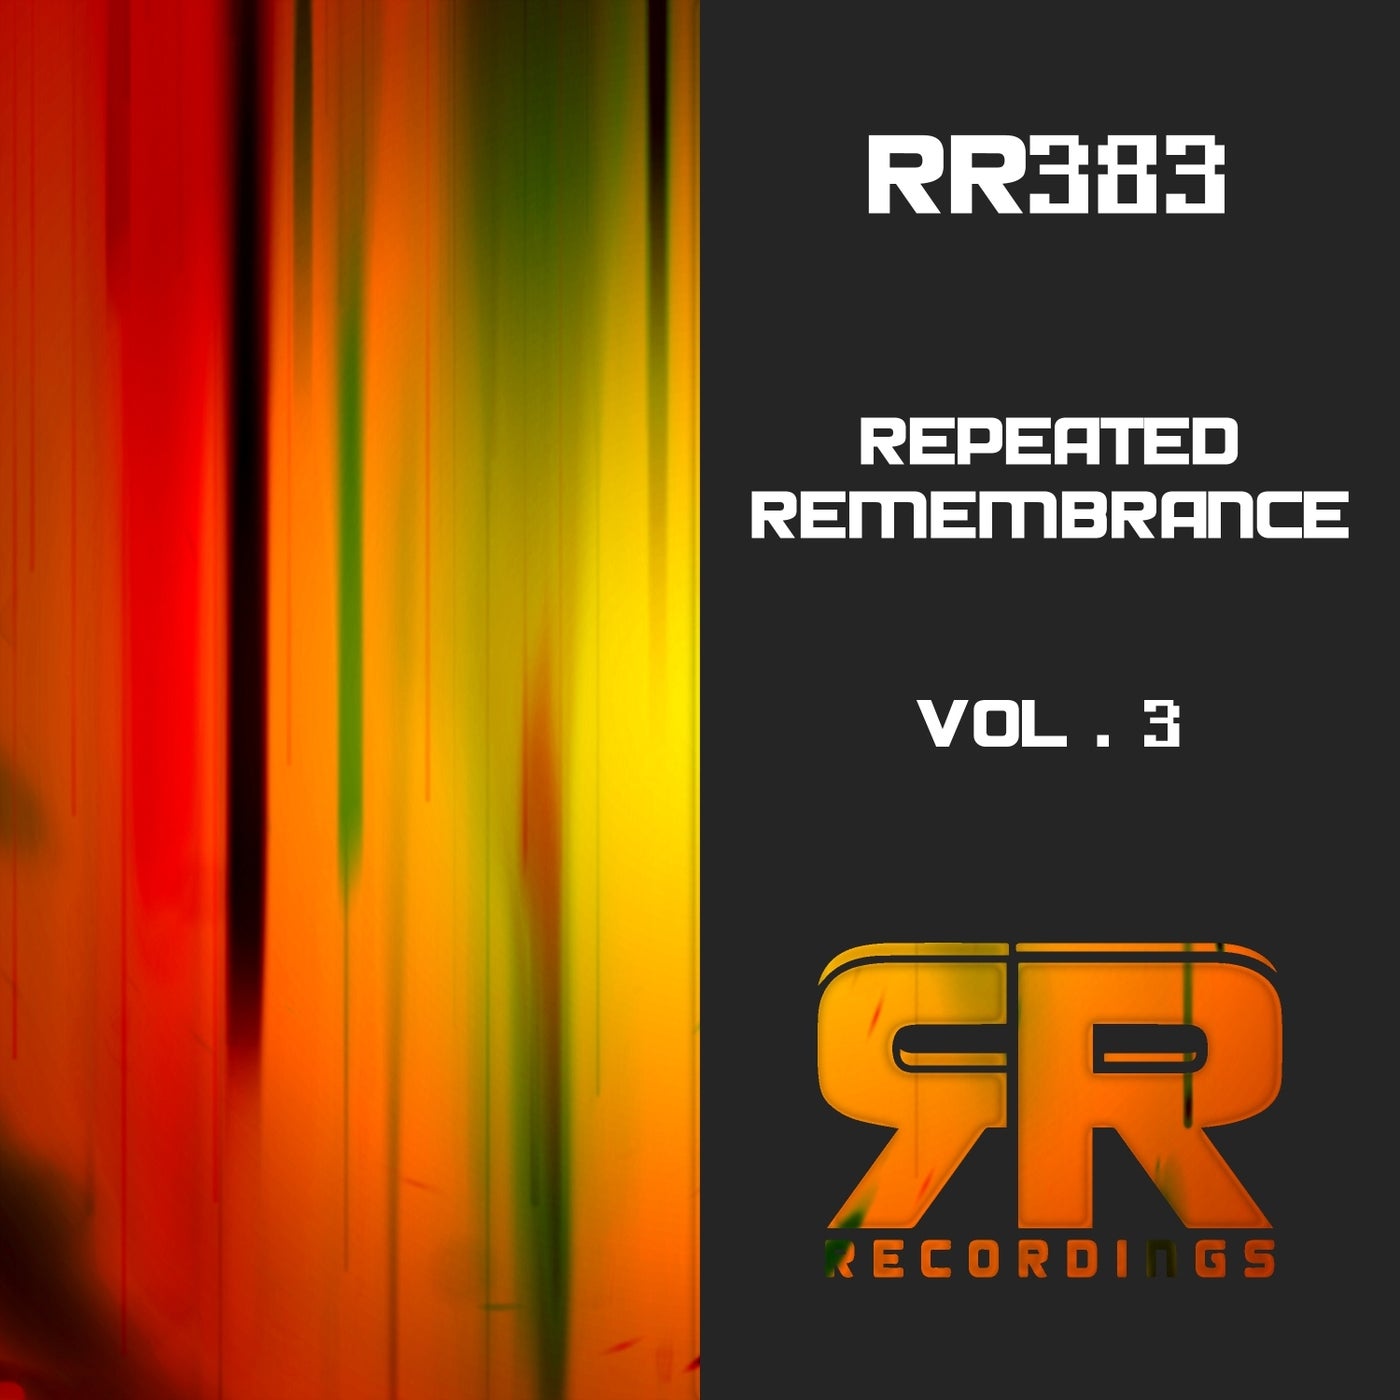 Repeated Remembrance, Vol. 3